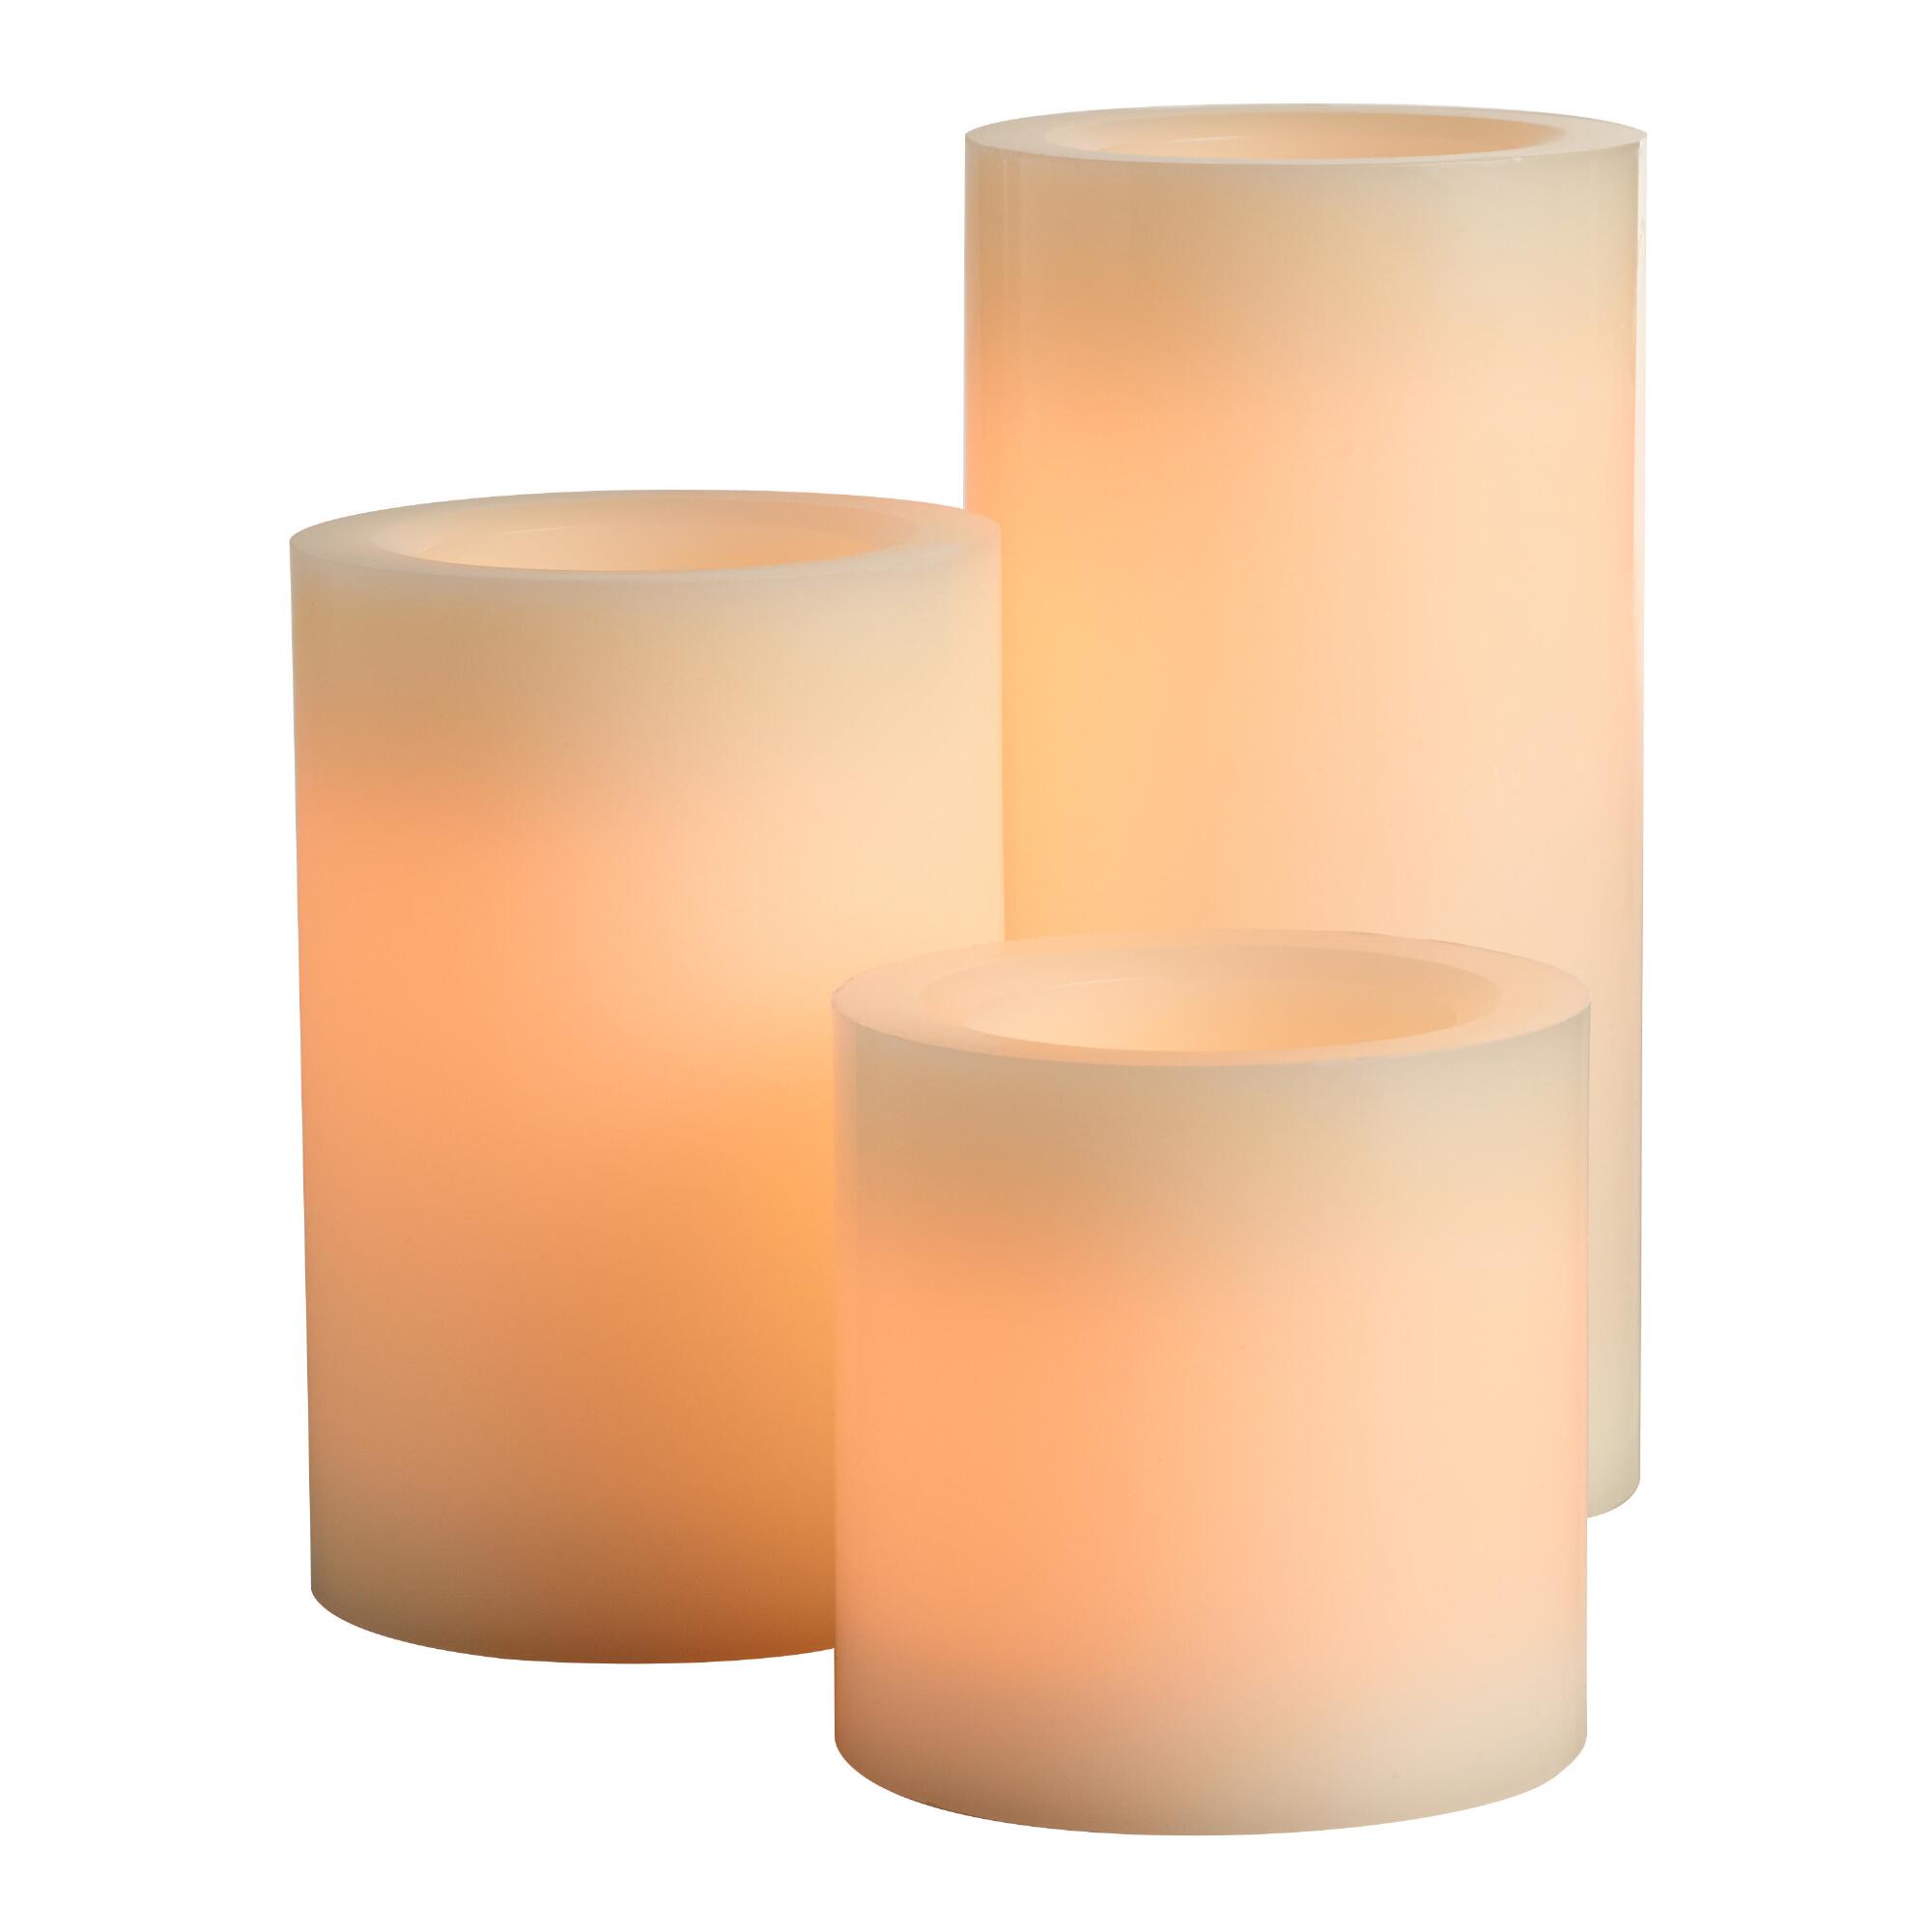 Ivory Flameless LED Pillar Candle: White - Unscented Wax by World Market